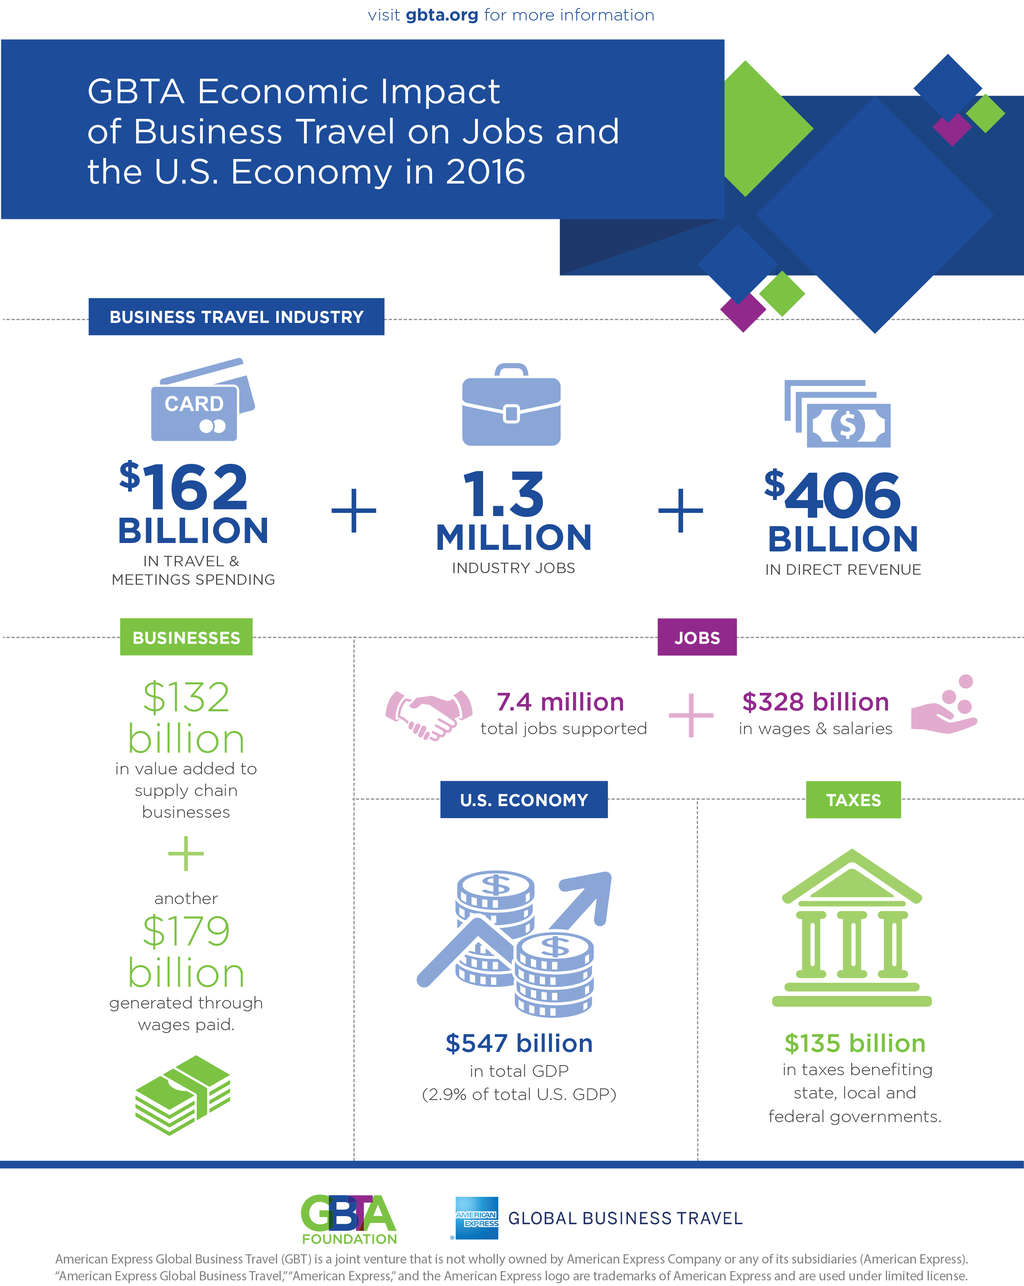 Business Travel Responsible for $547 Billion in U.S. GDP in 2016, Creates Over 7.4 Million Jobs